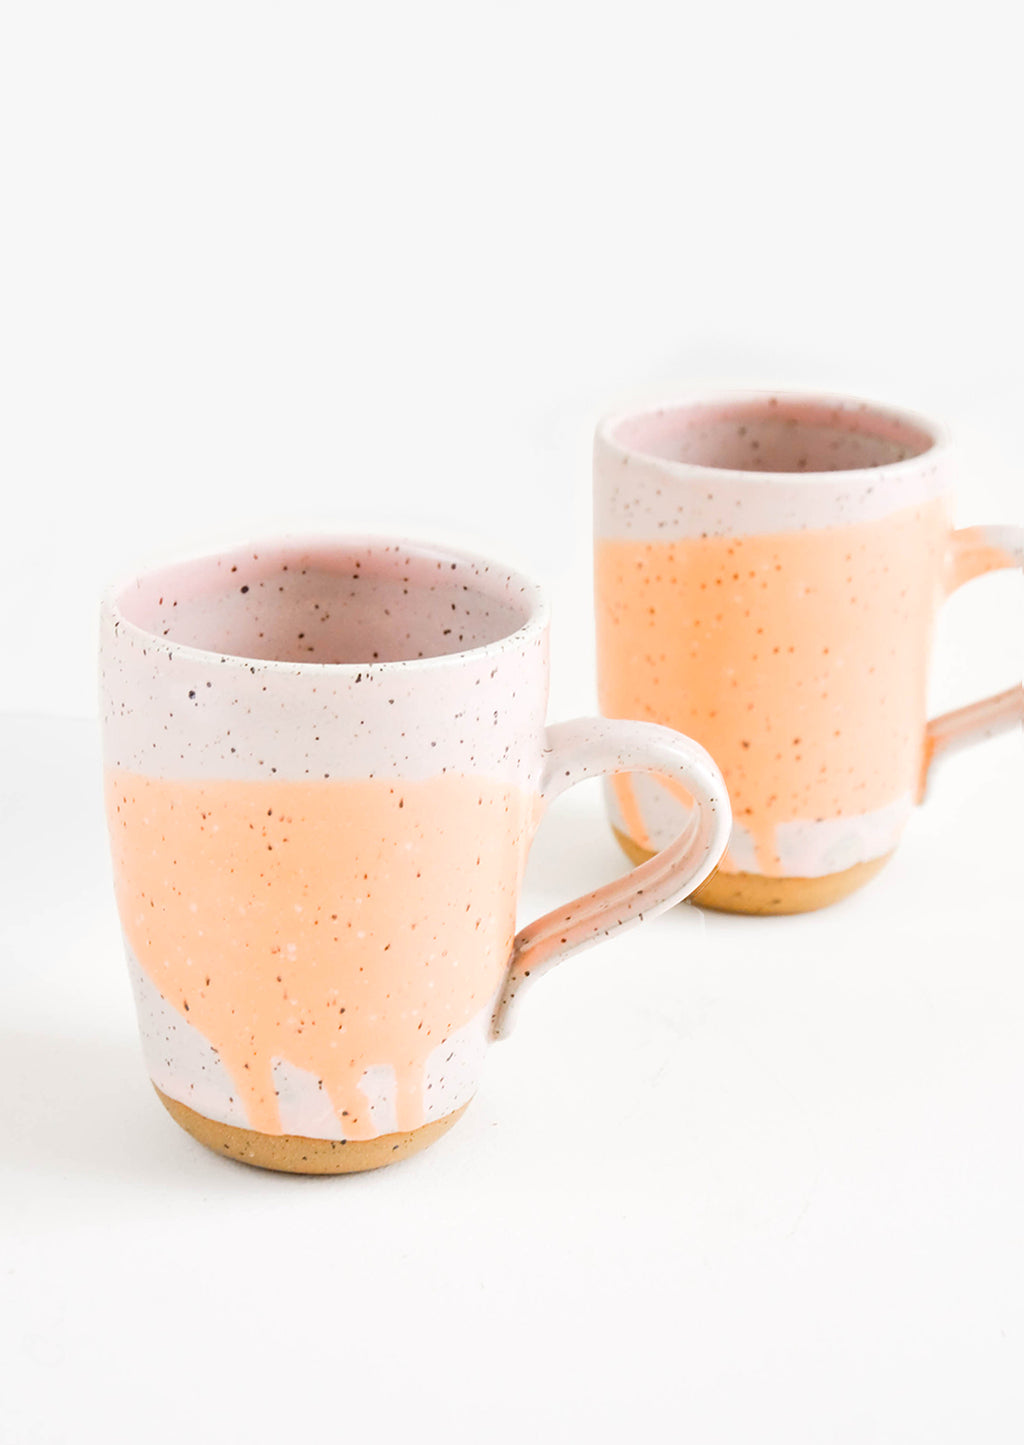 Pink / Peach: Two ceramic mugs in orange and pink with brown speckles.